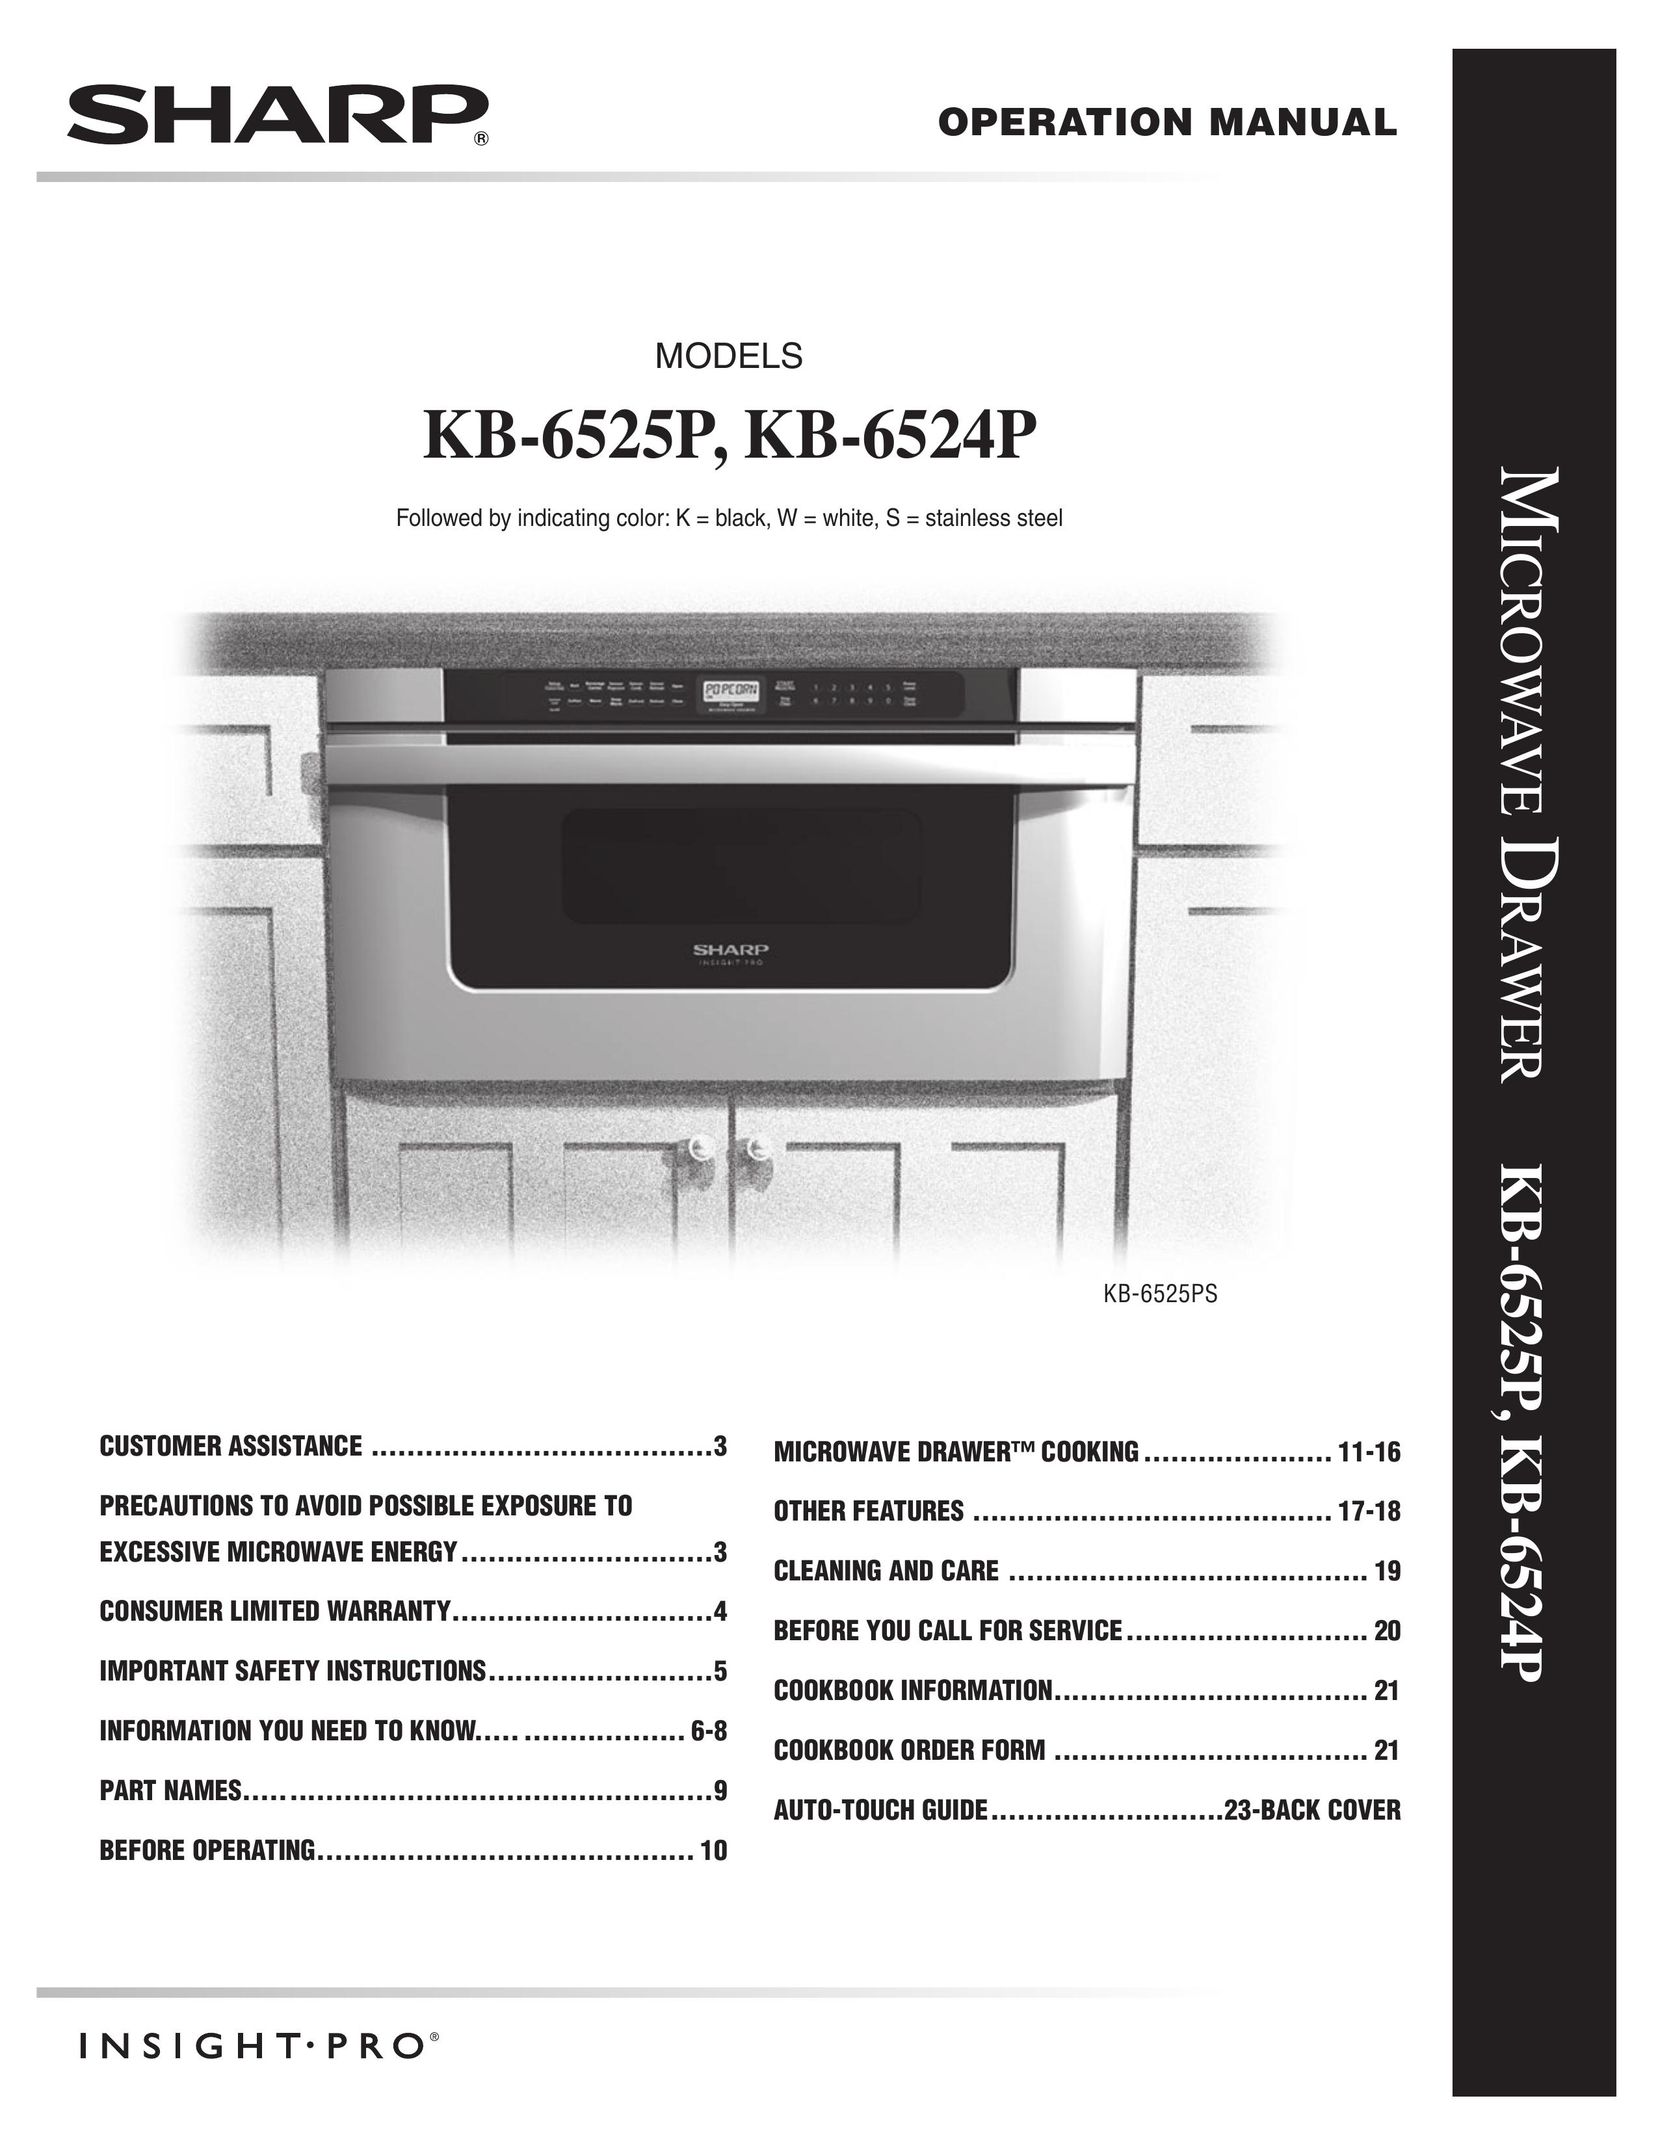 Sharp KB6525PW Microwave Oven User Manual